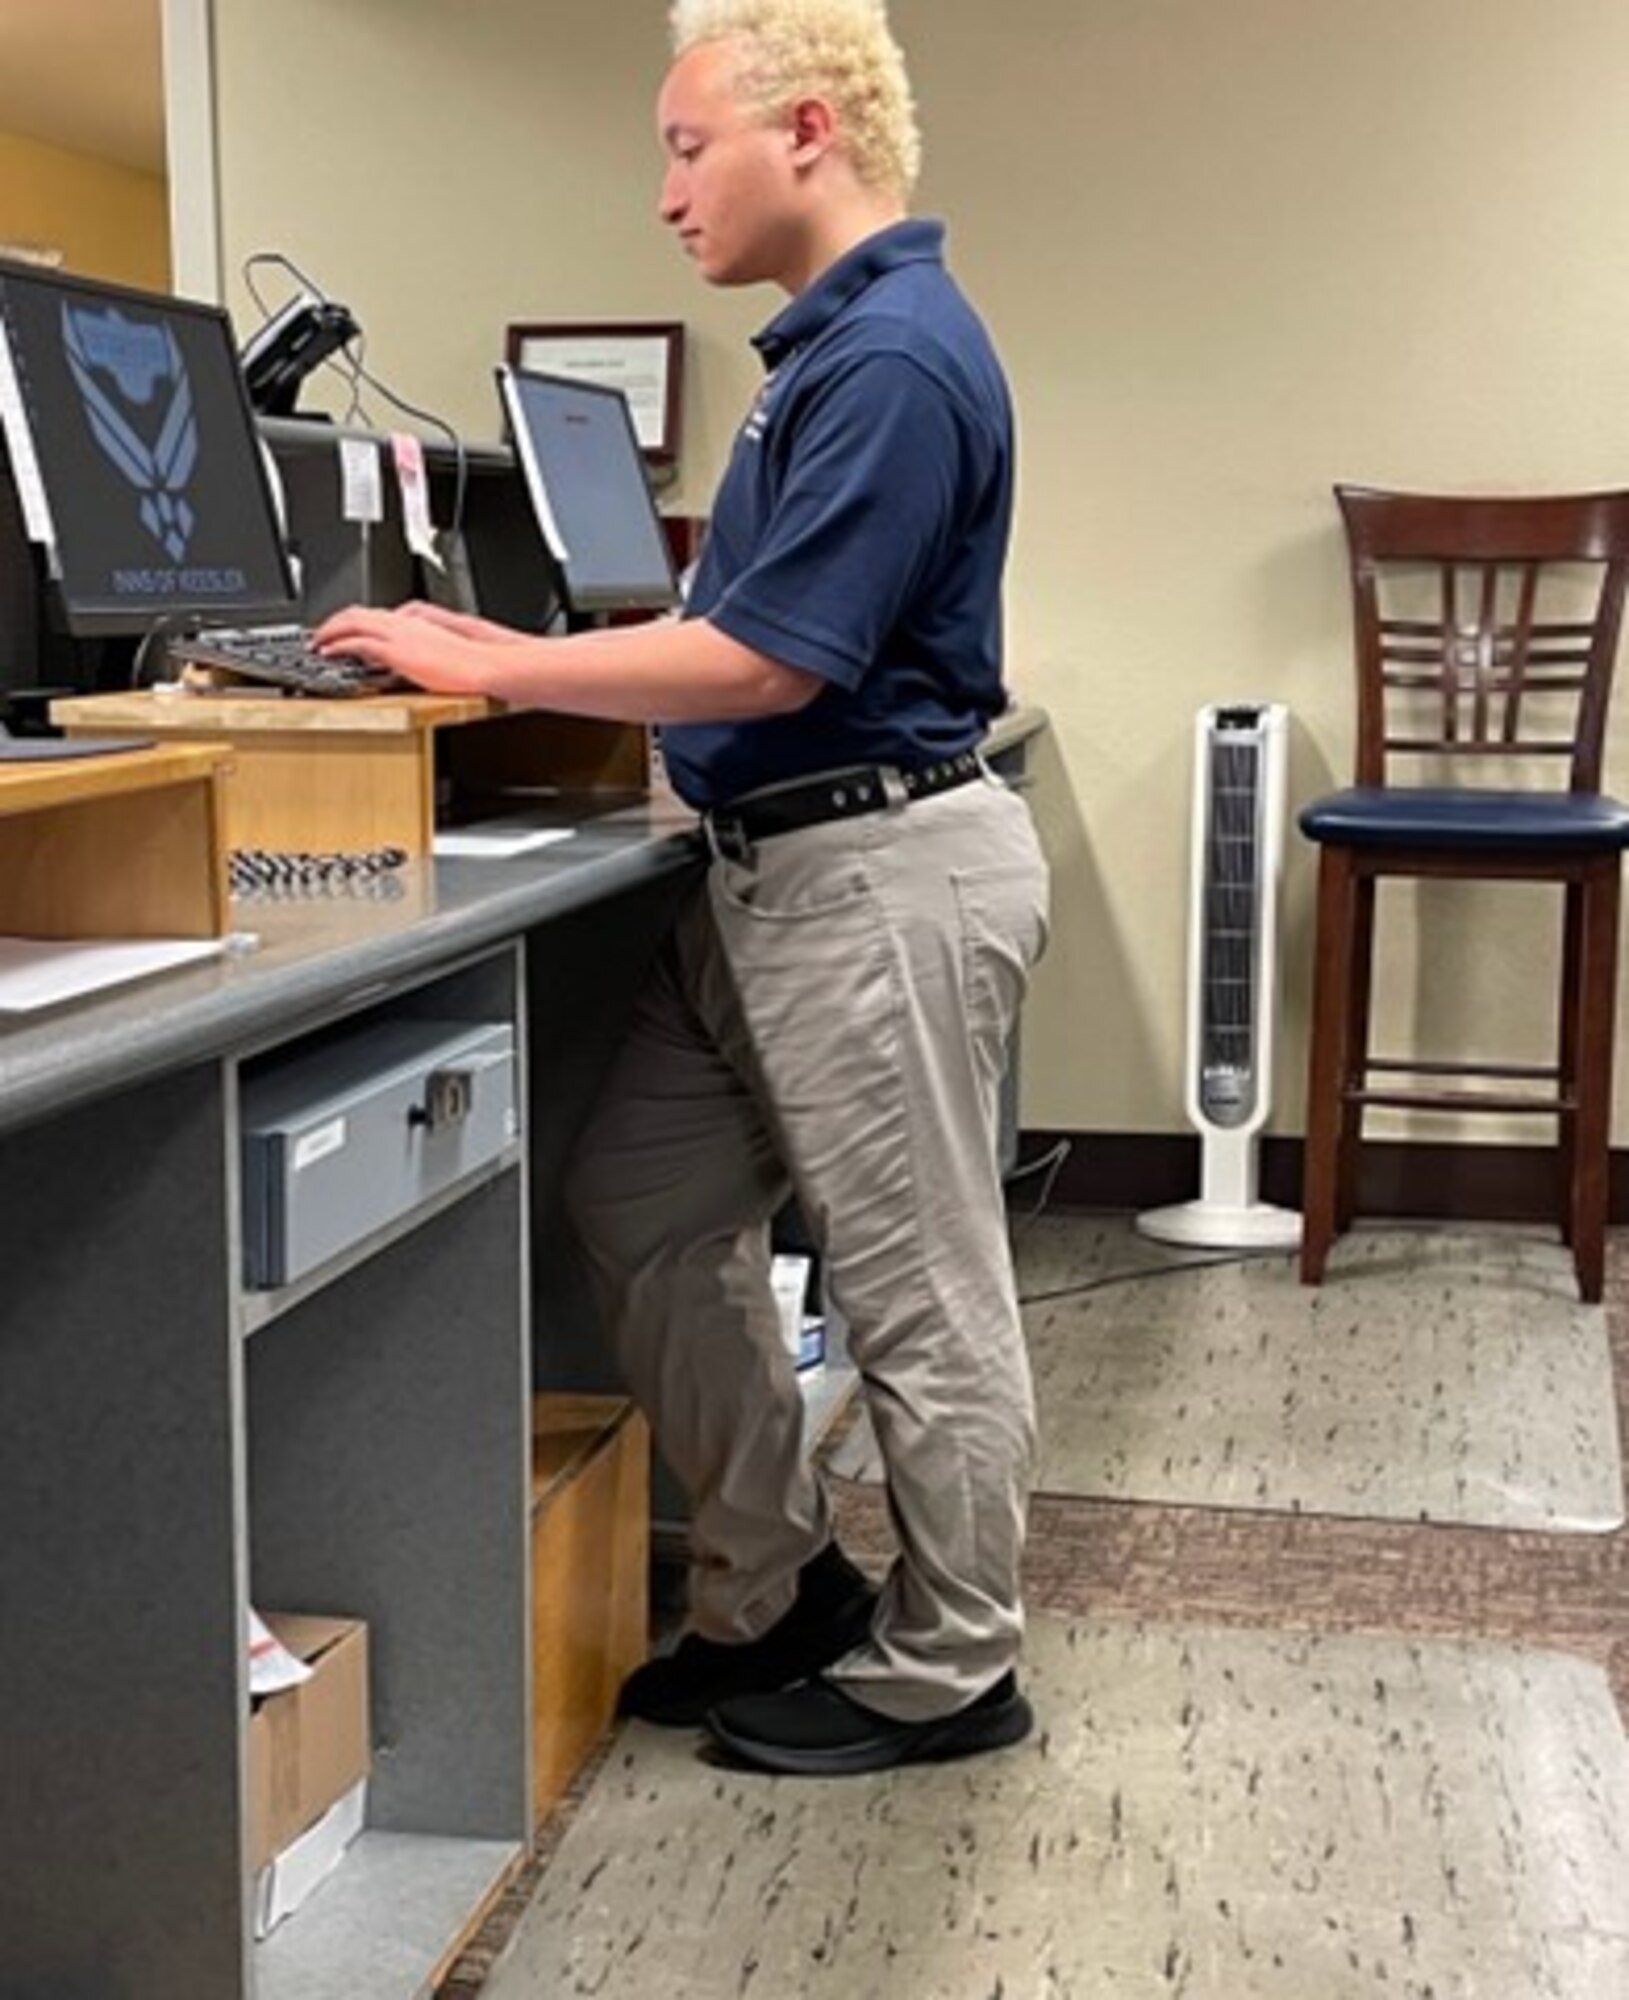 Courtesy photo of Charles Mueller, Project SEARCH intern, learning guest services skills while working with Keesler Air Force Base Lodging.